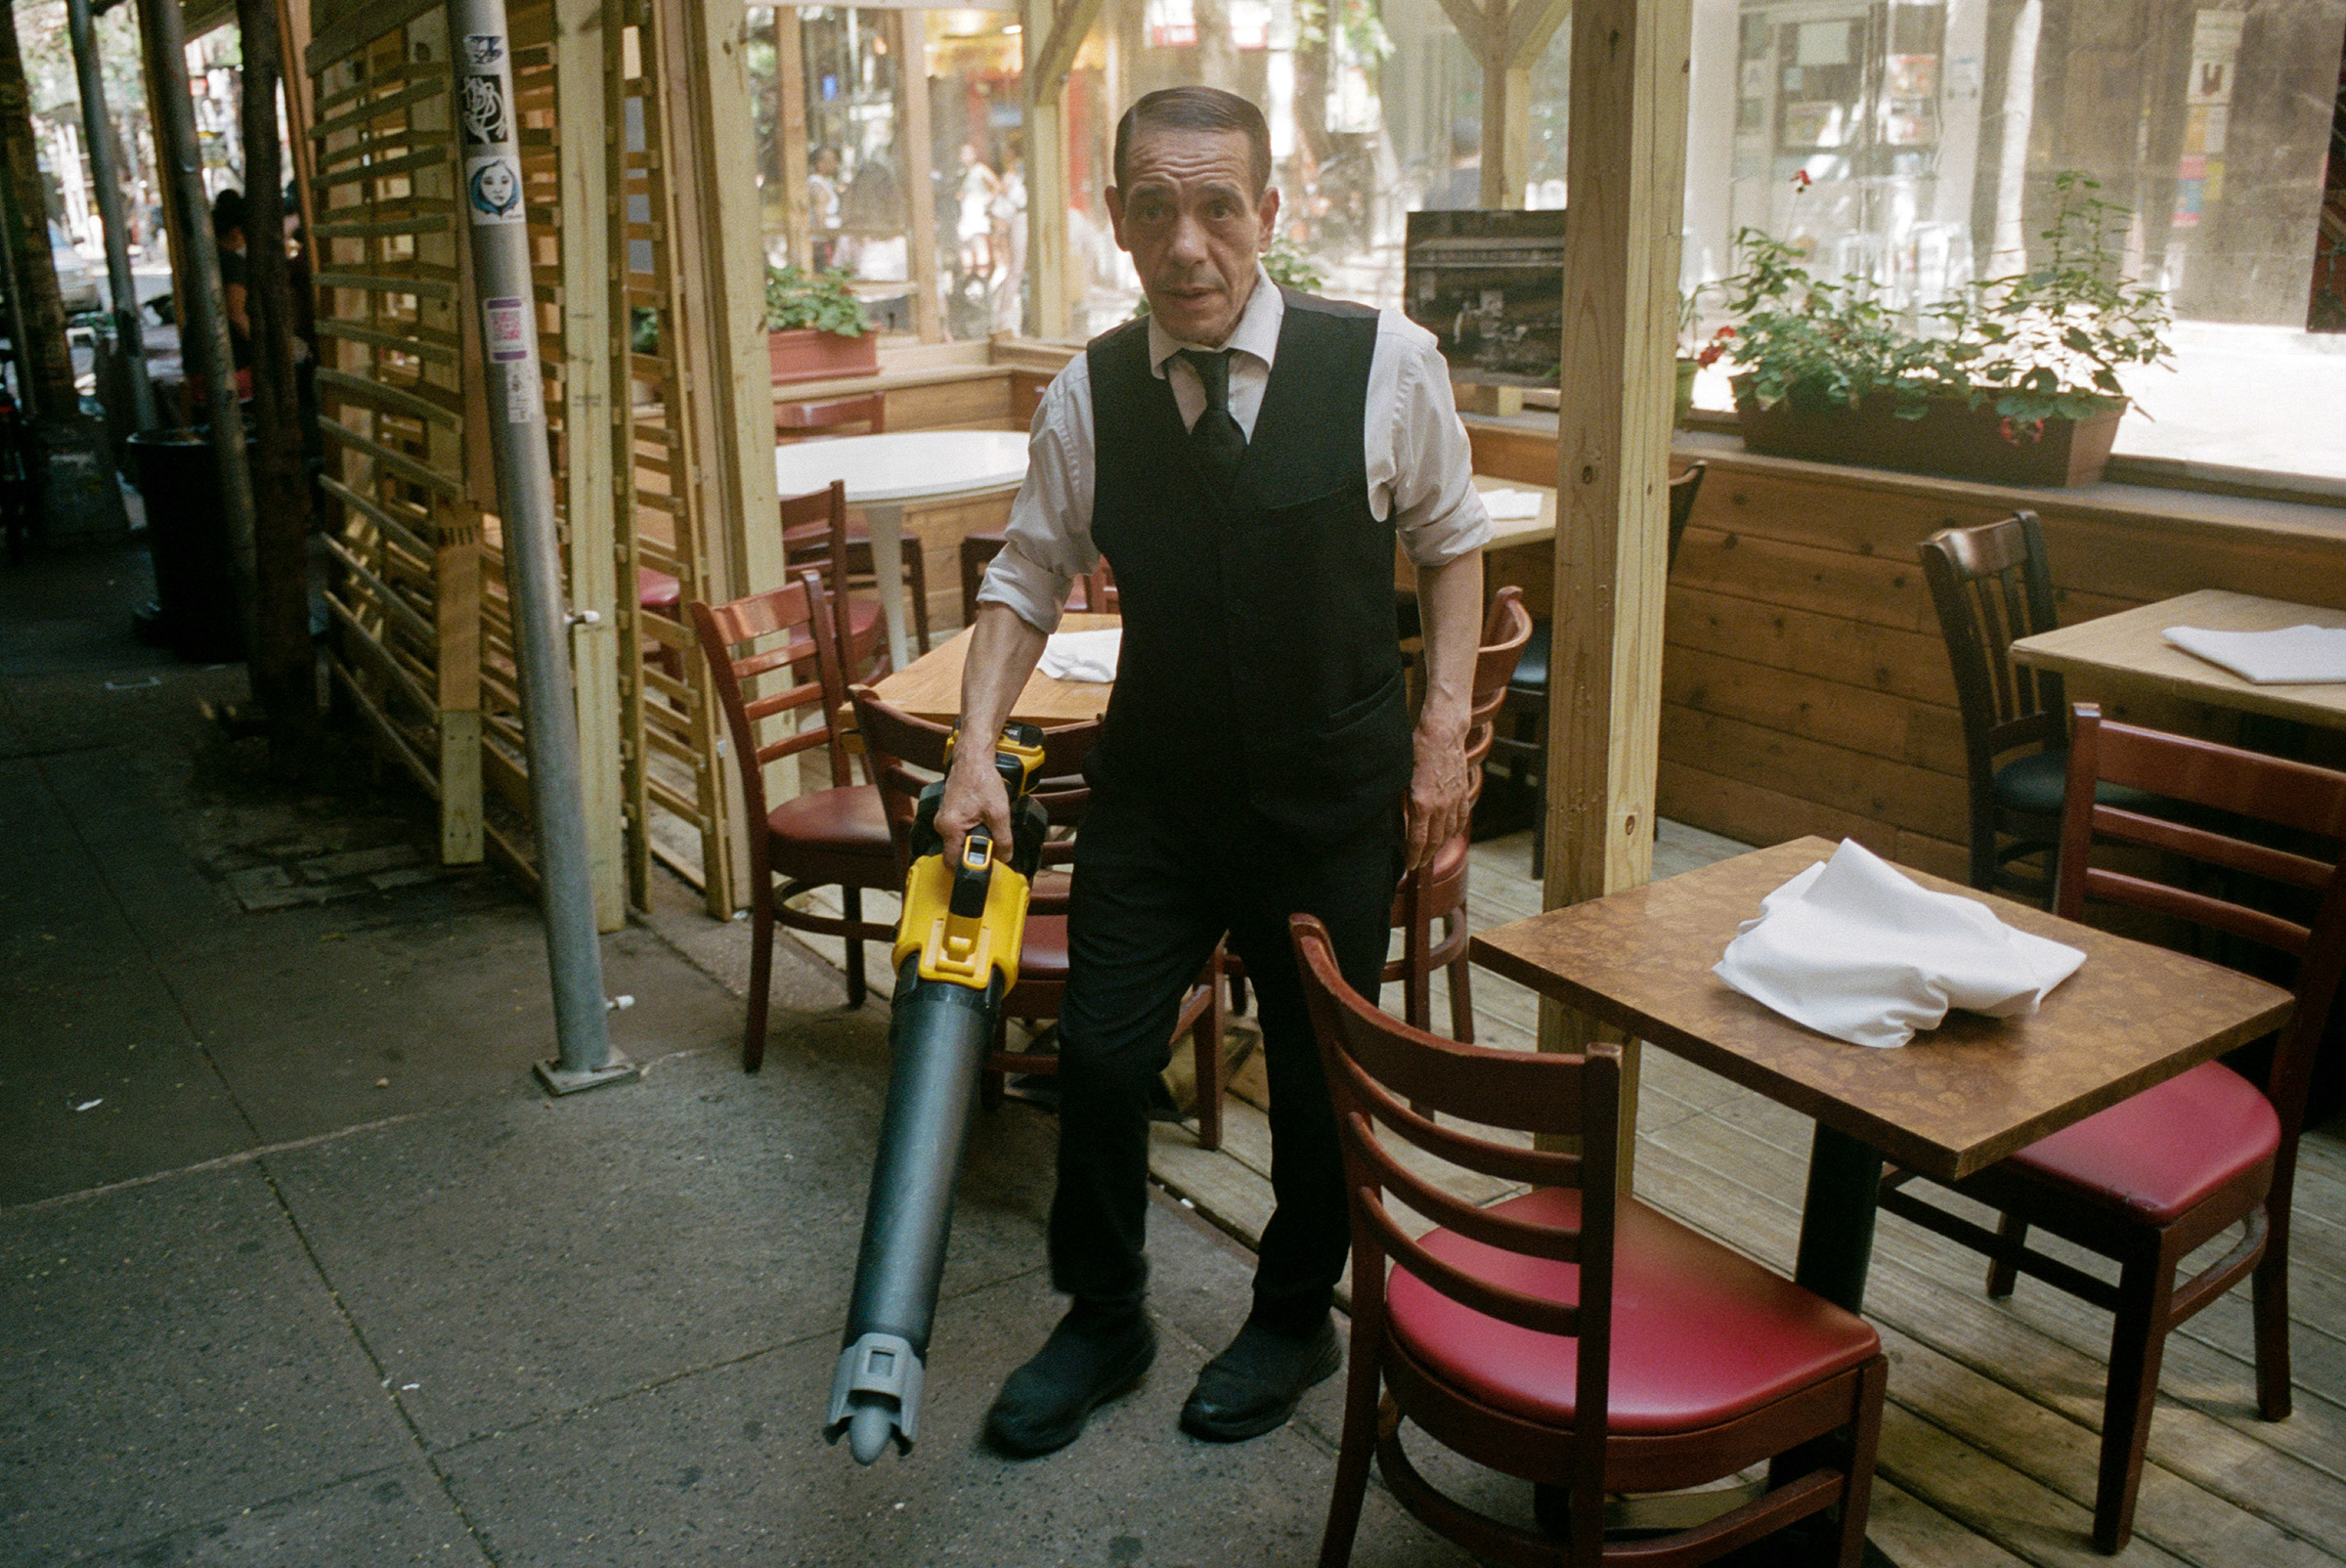 A maître d' cleans an outdoor seating area with a blower before evening service on MacDougal Street, Aug. 12, 2021. (Daniel Arnold)